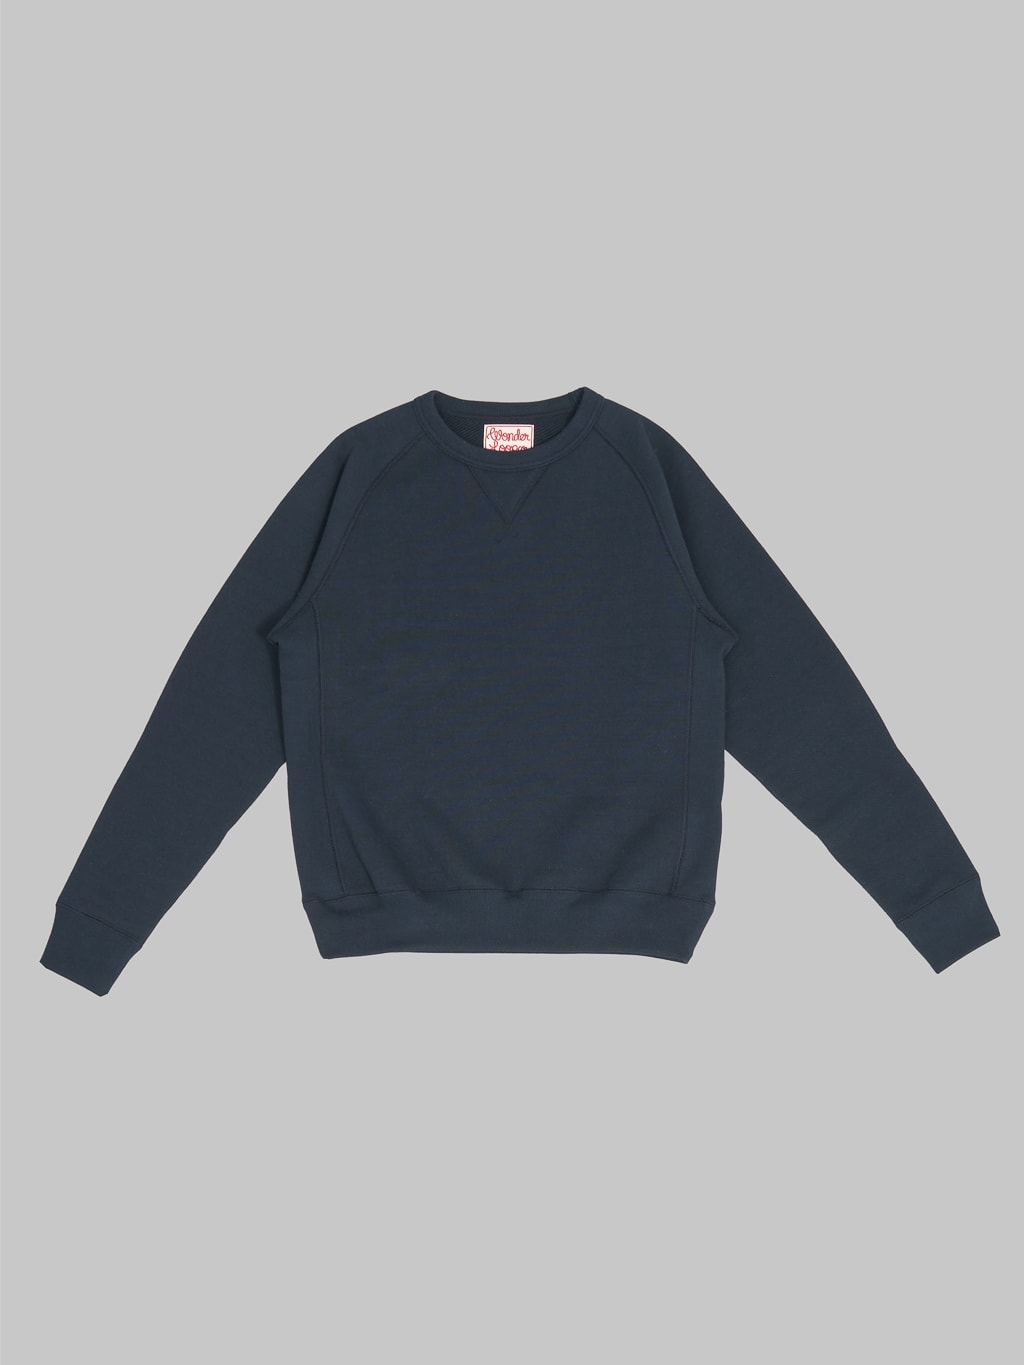 Wonder Looper Pullover Crewneck Double Heavyweight French Terry navy front view